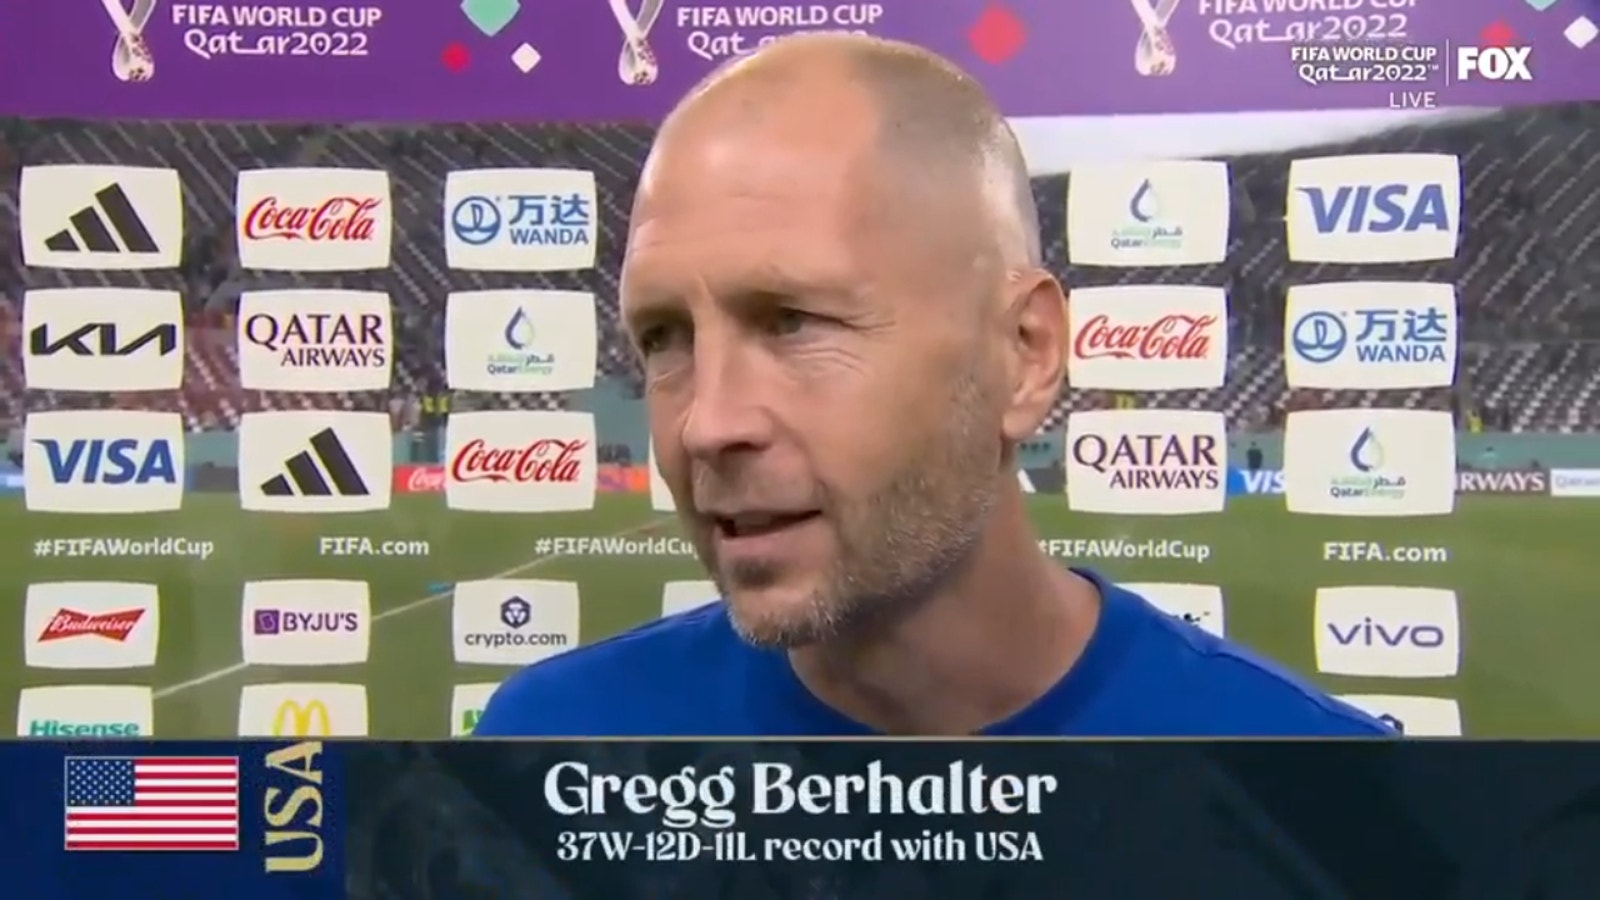 Gregg Berhalter shows pride for his team and is encouraged for the future of USMNT